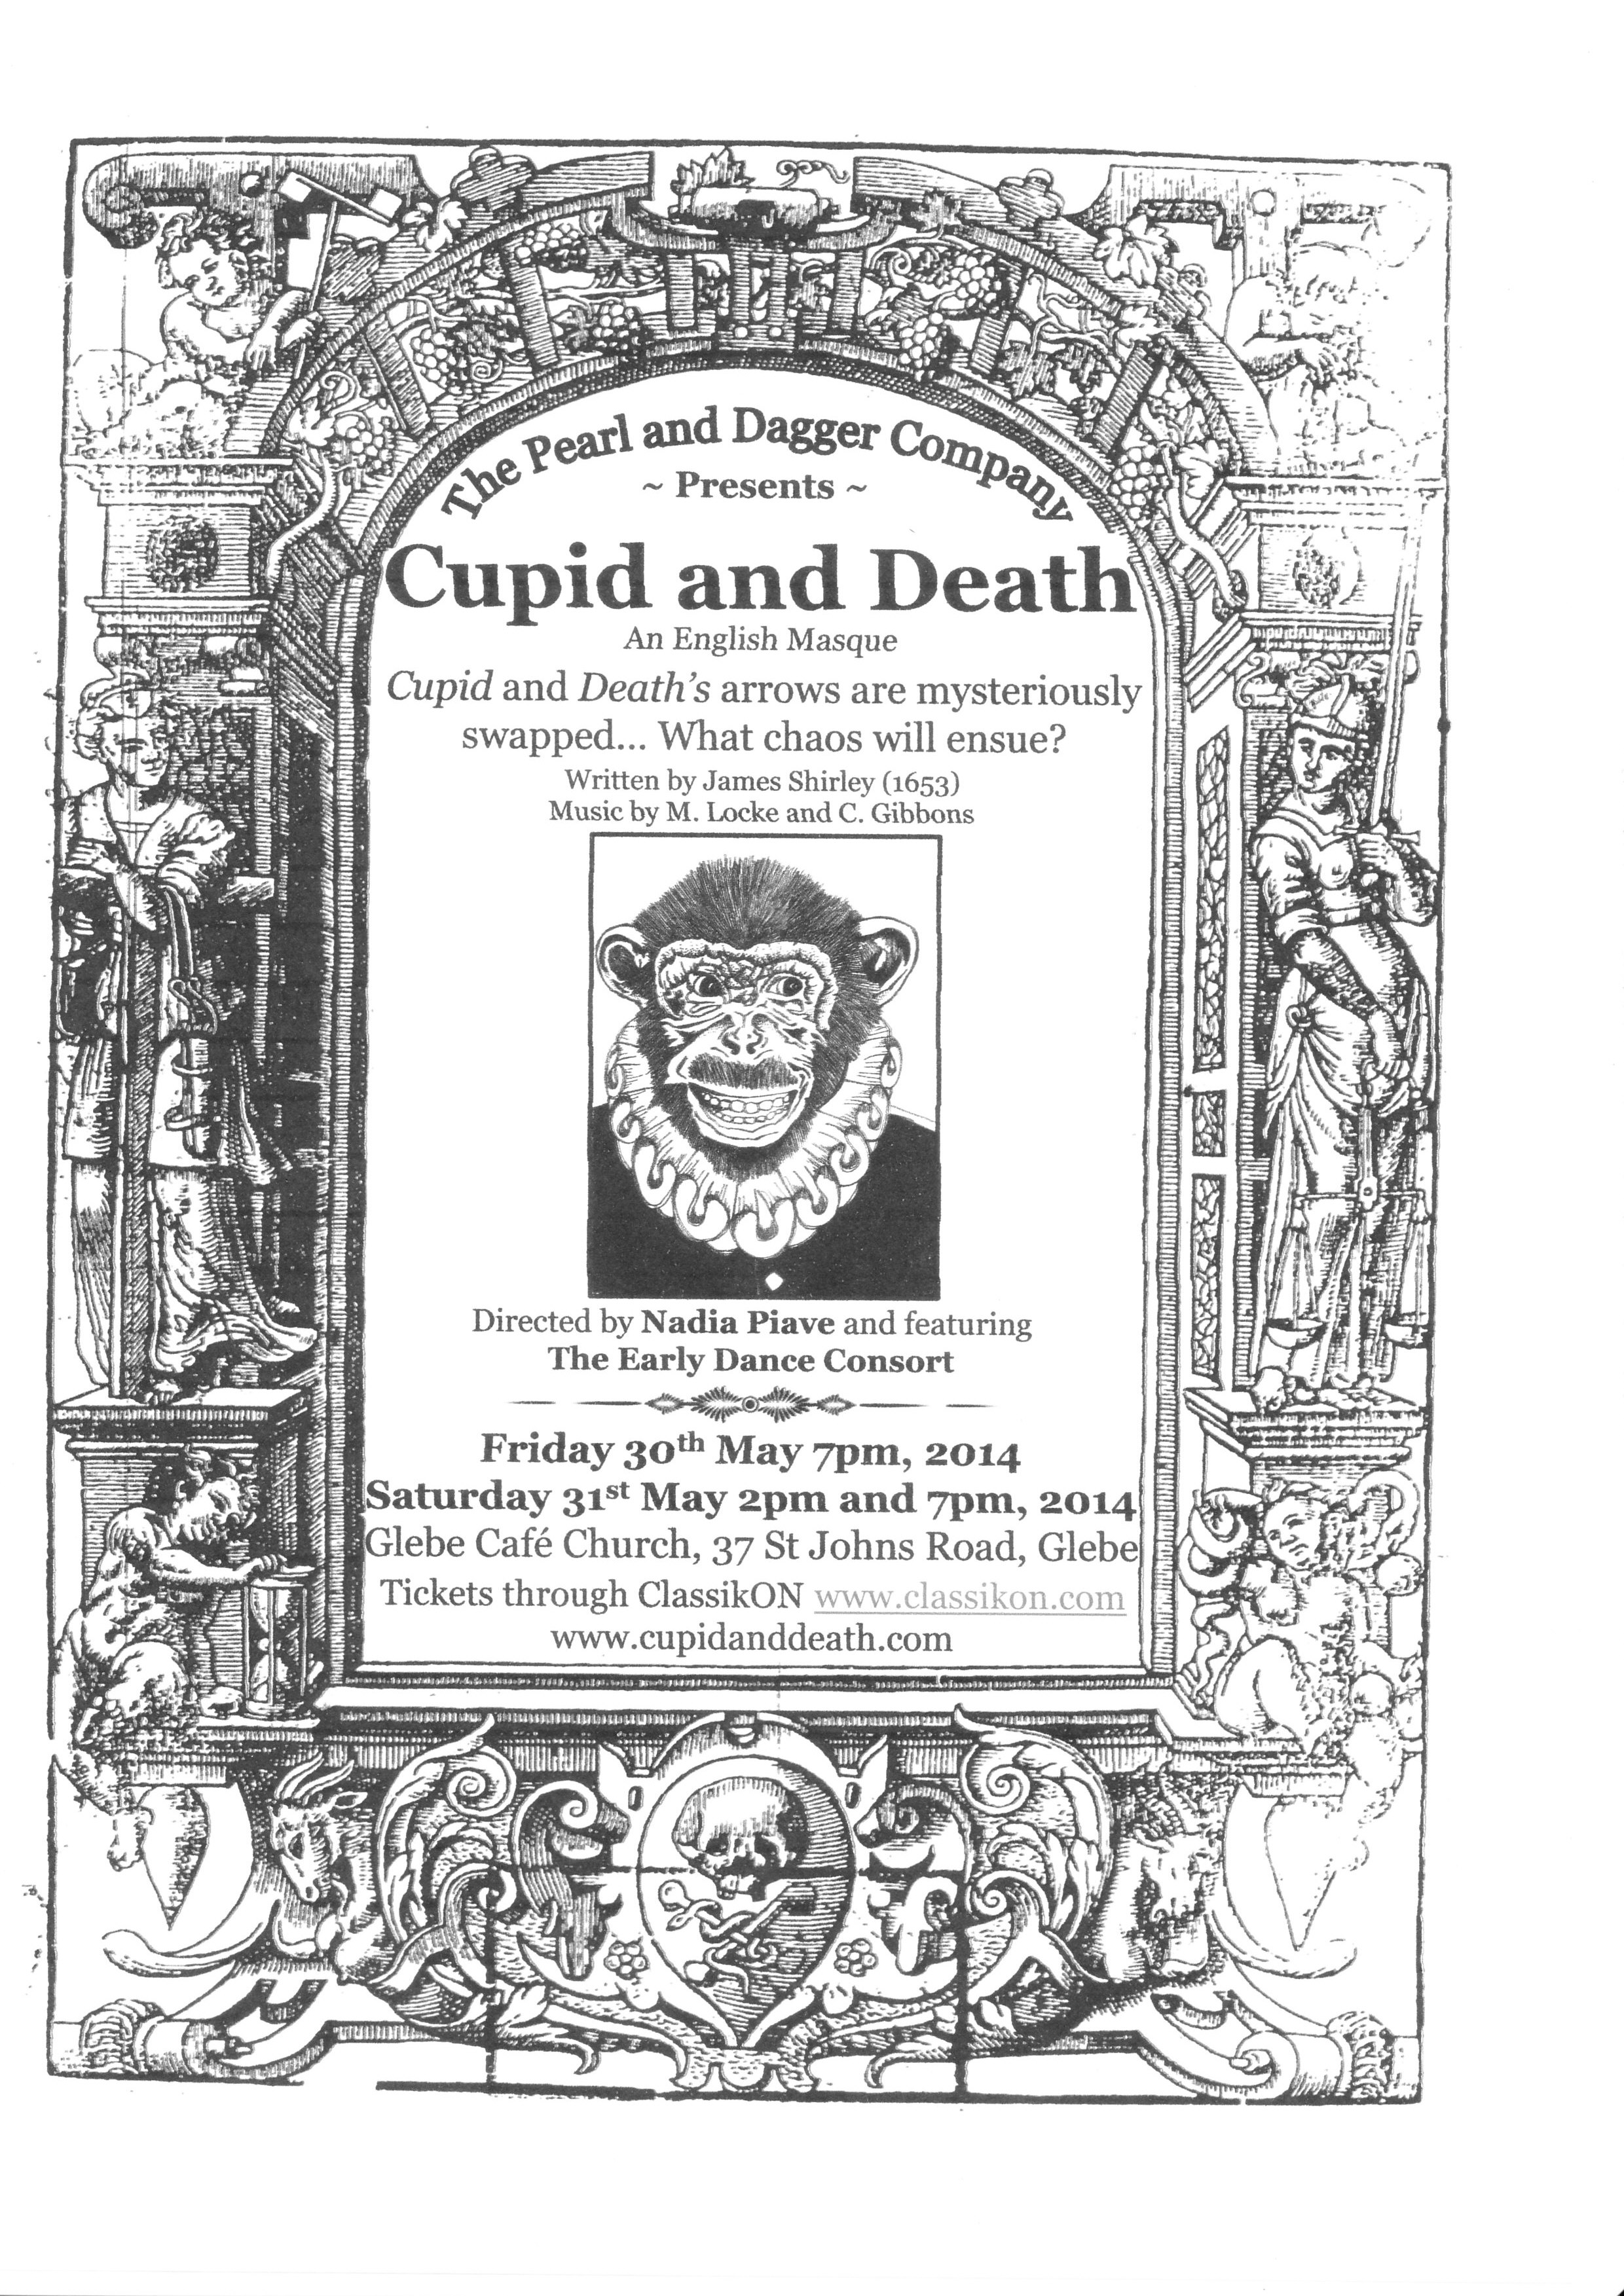 Cupid and Death: Debut Production For The Pearl And Dagger Company